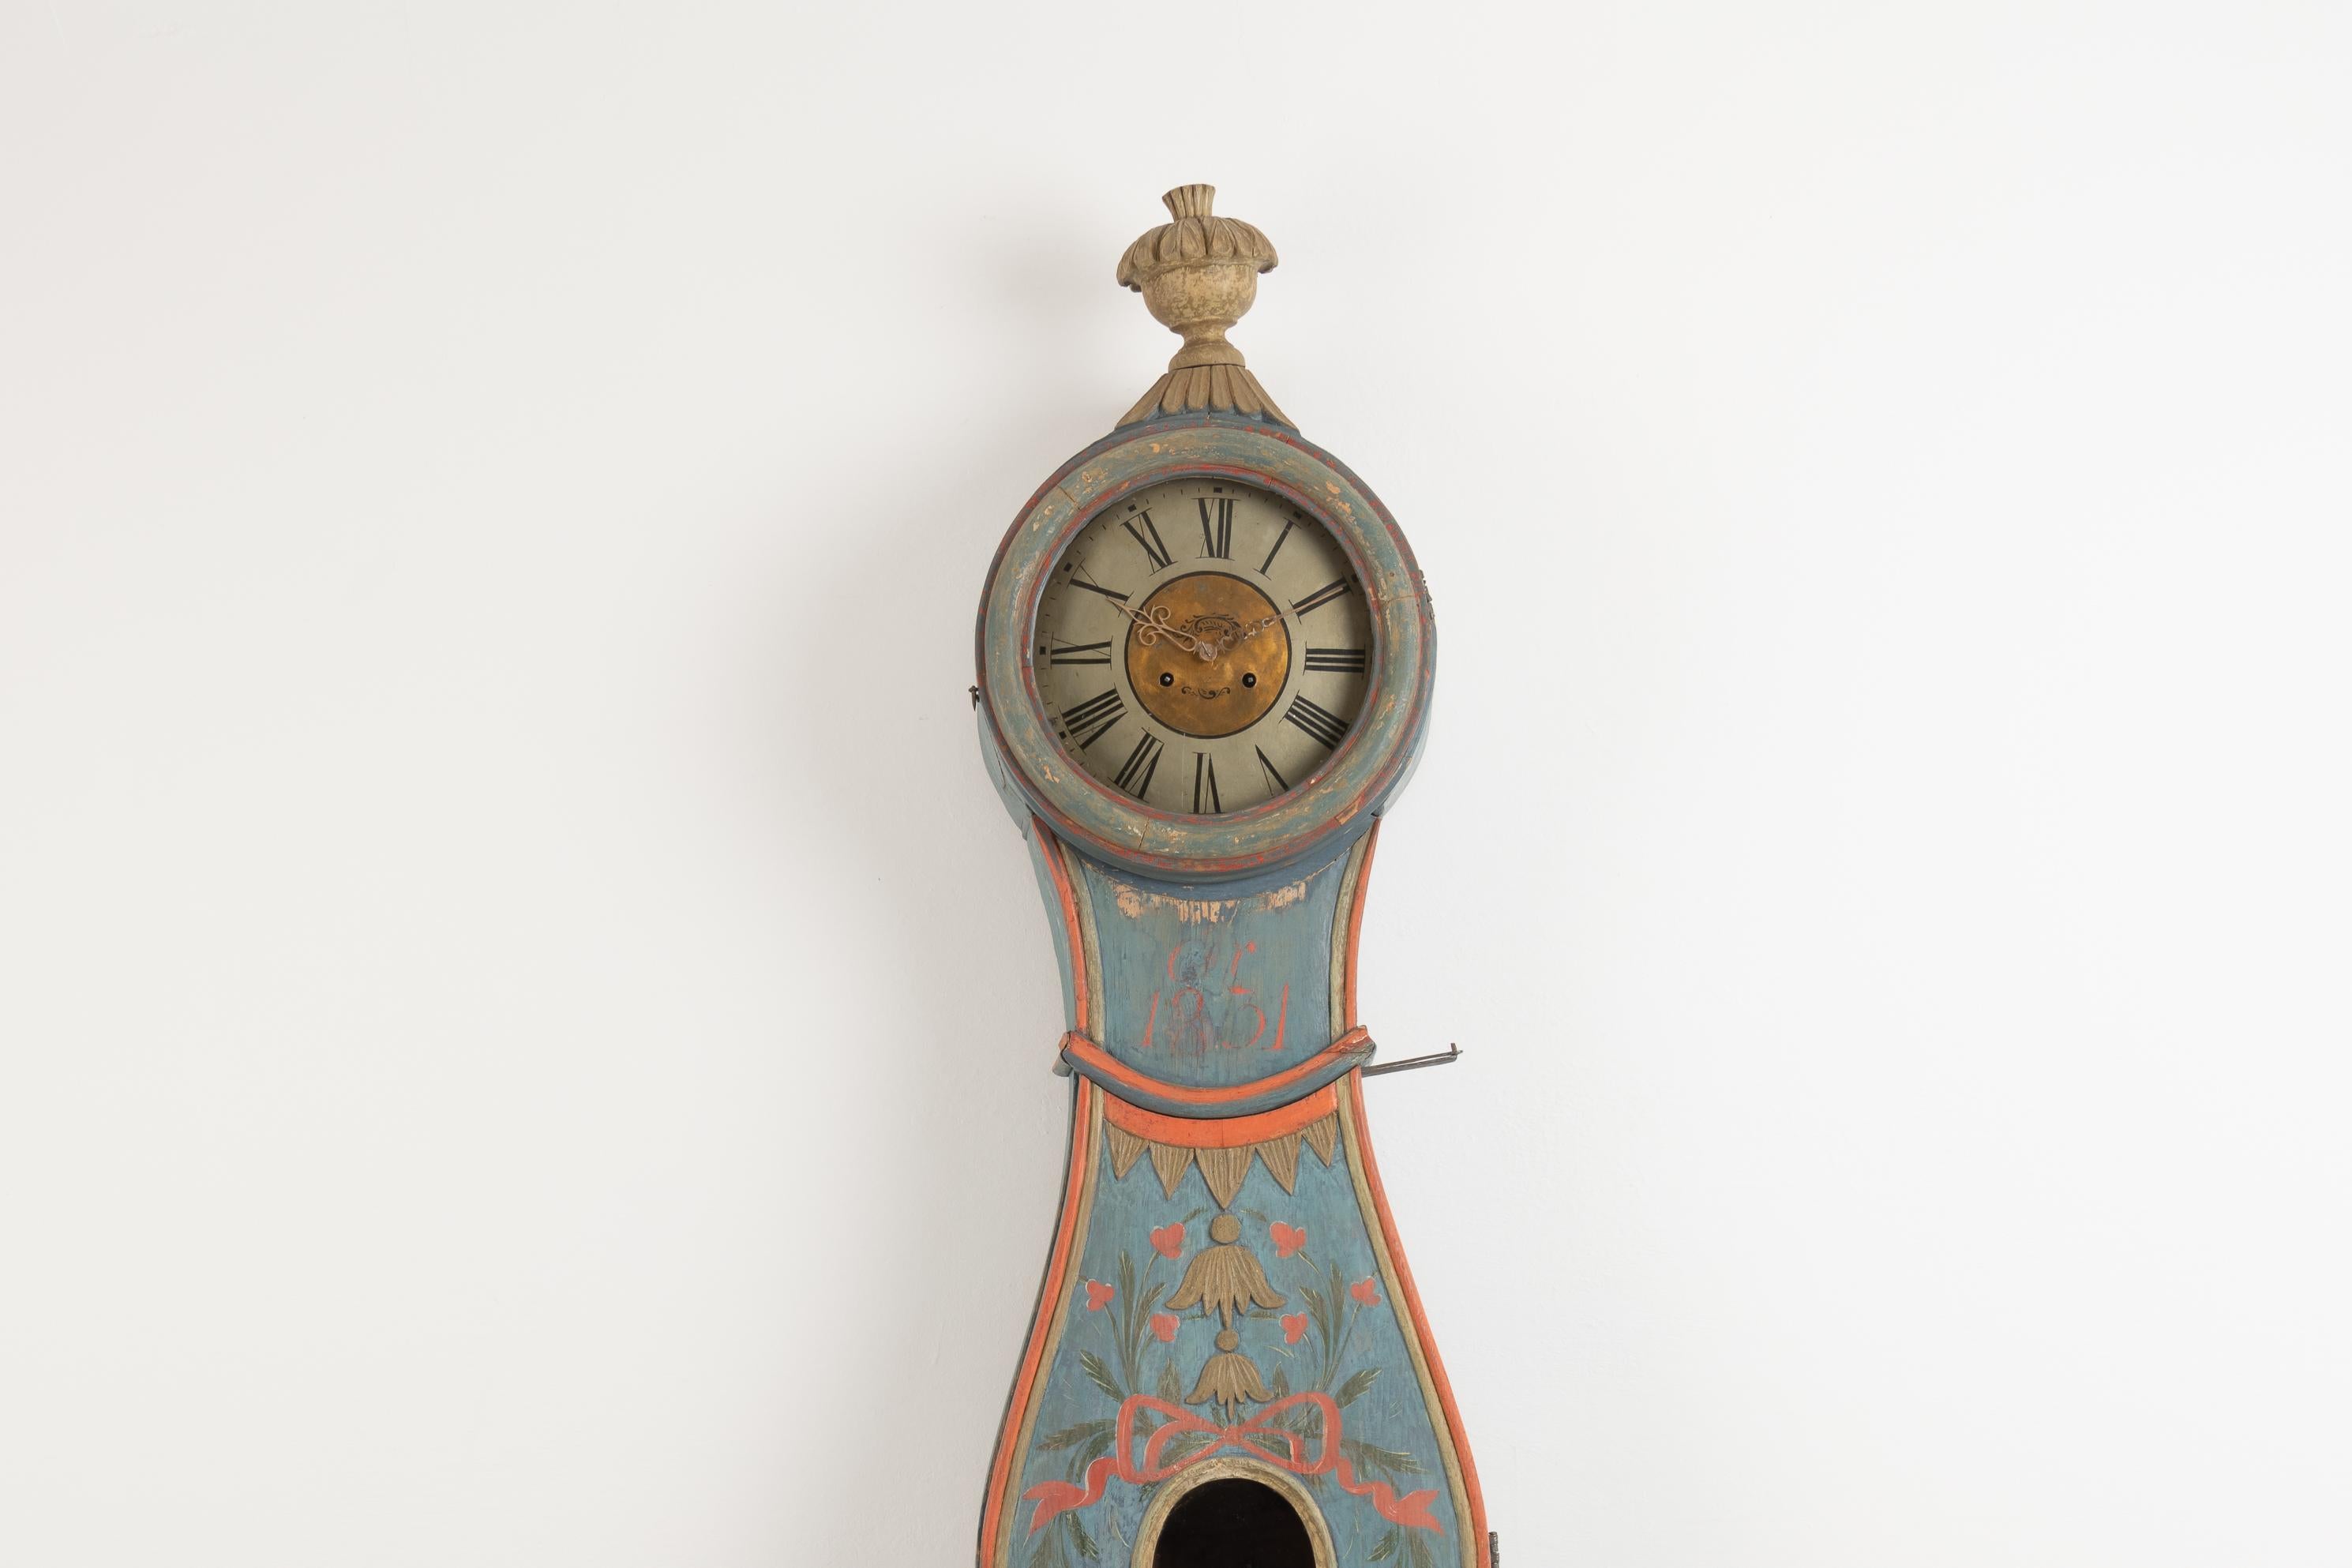 Swedish long case clock with hand scraped to original blue paint. The clock shows influences from the rococo period with the curved case. Hand carved decoration in wood at the top of the head. The clock is from the municipality Ljusdal in the